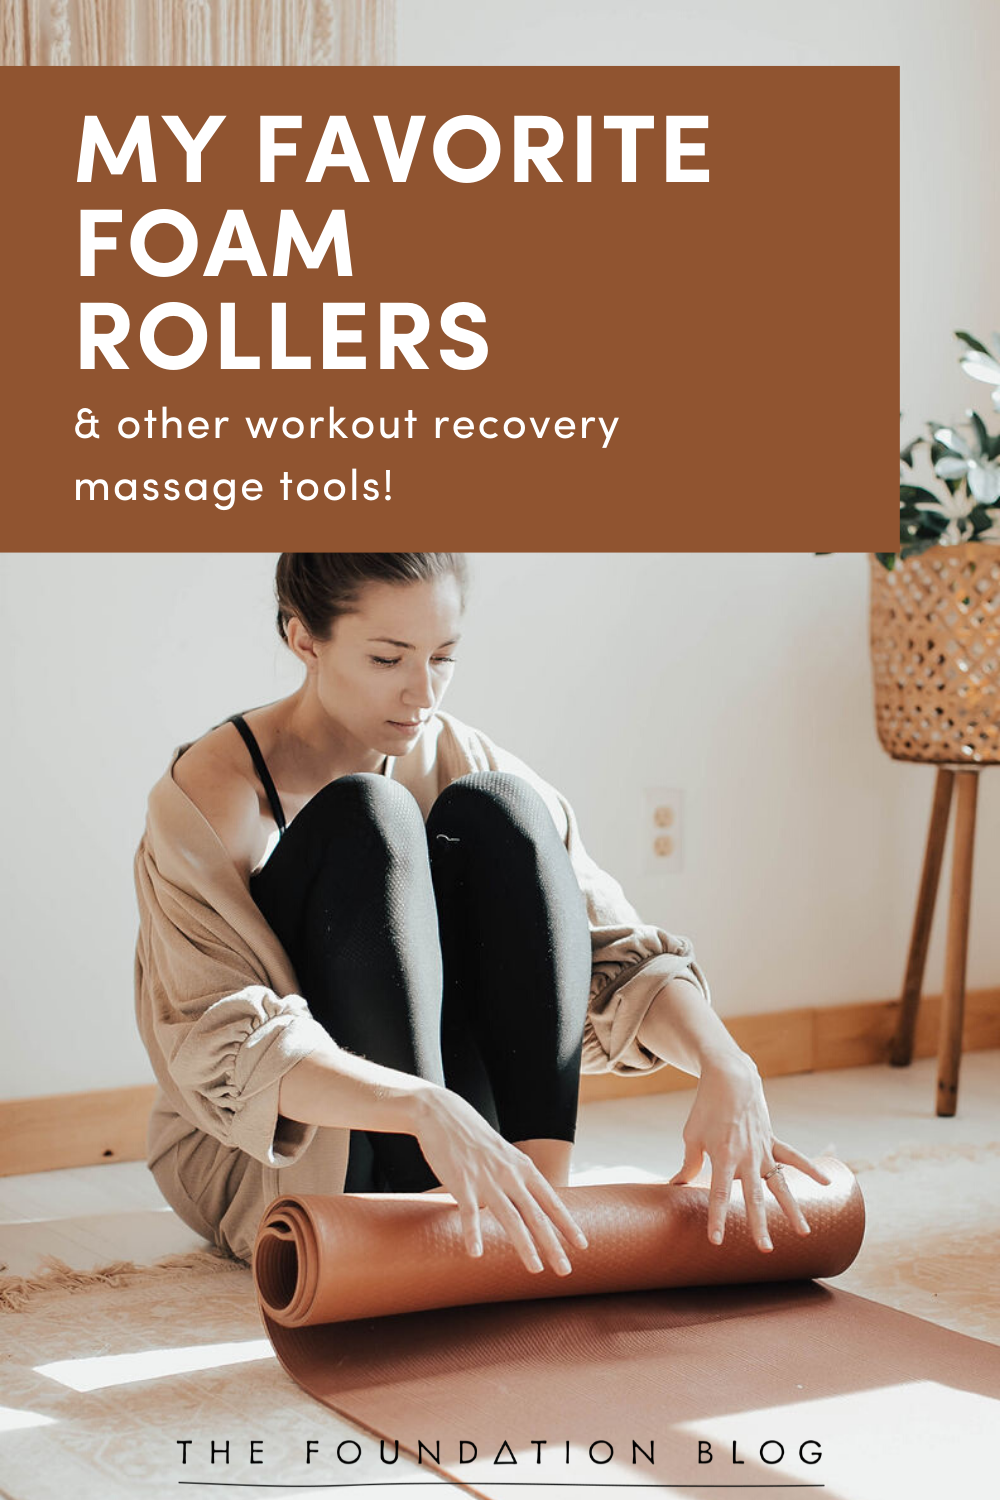 Workout recovery tools